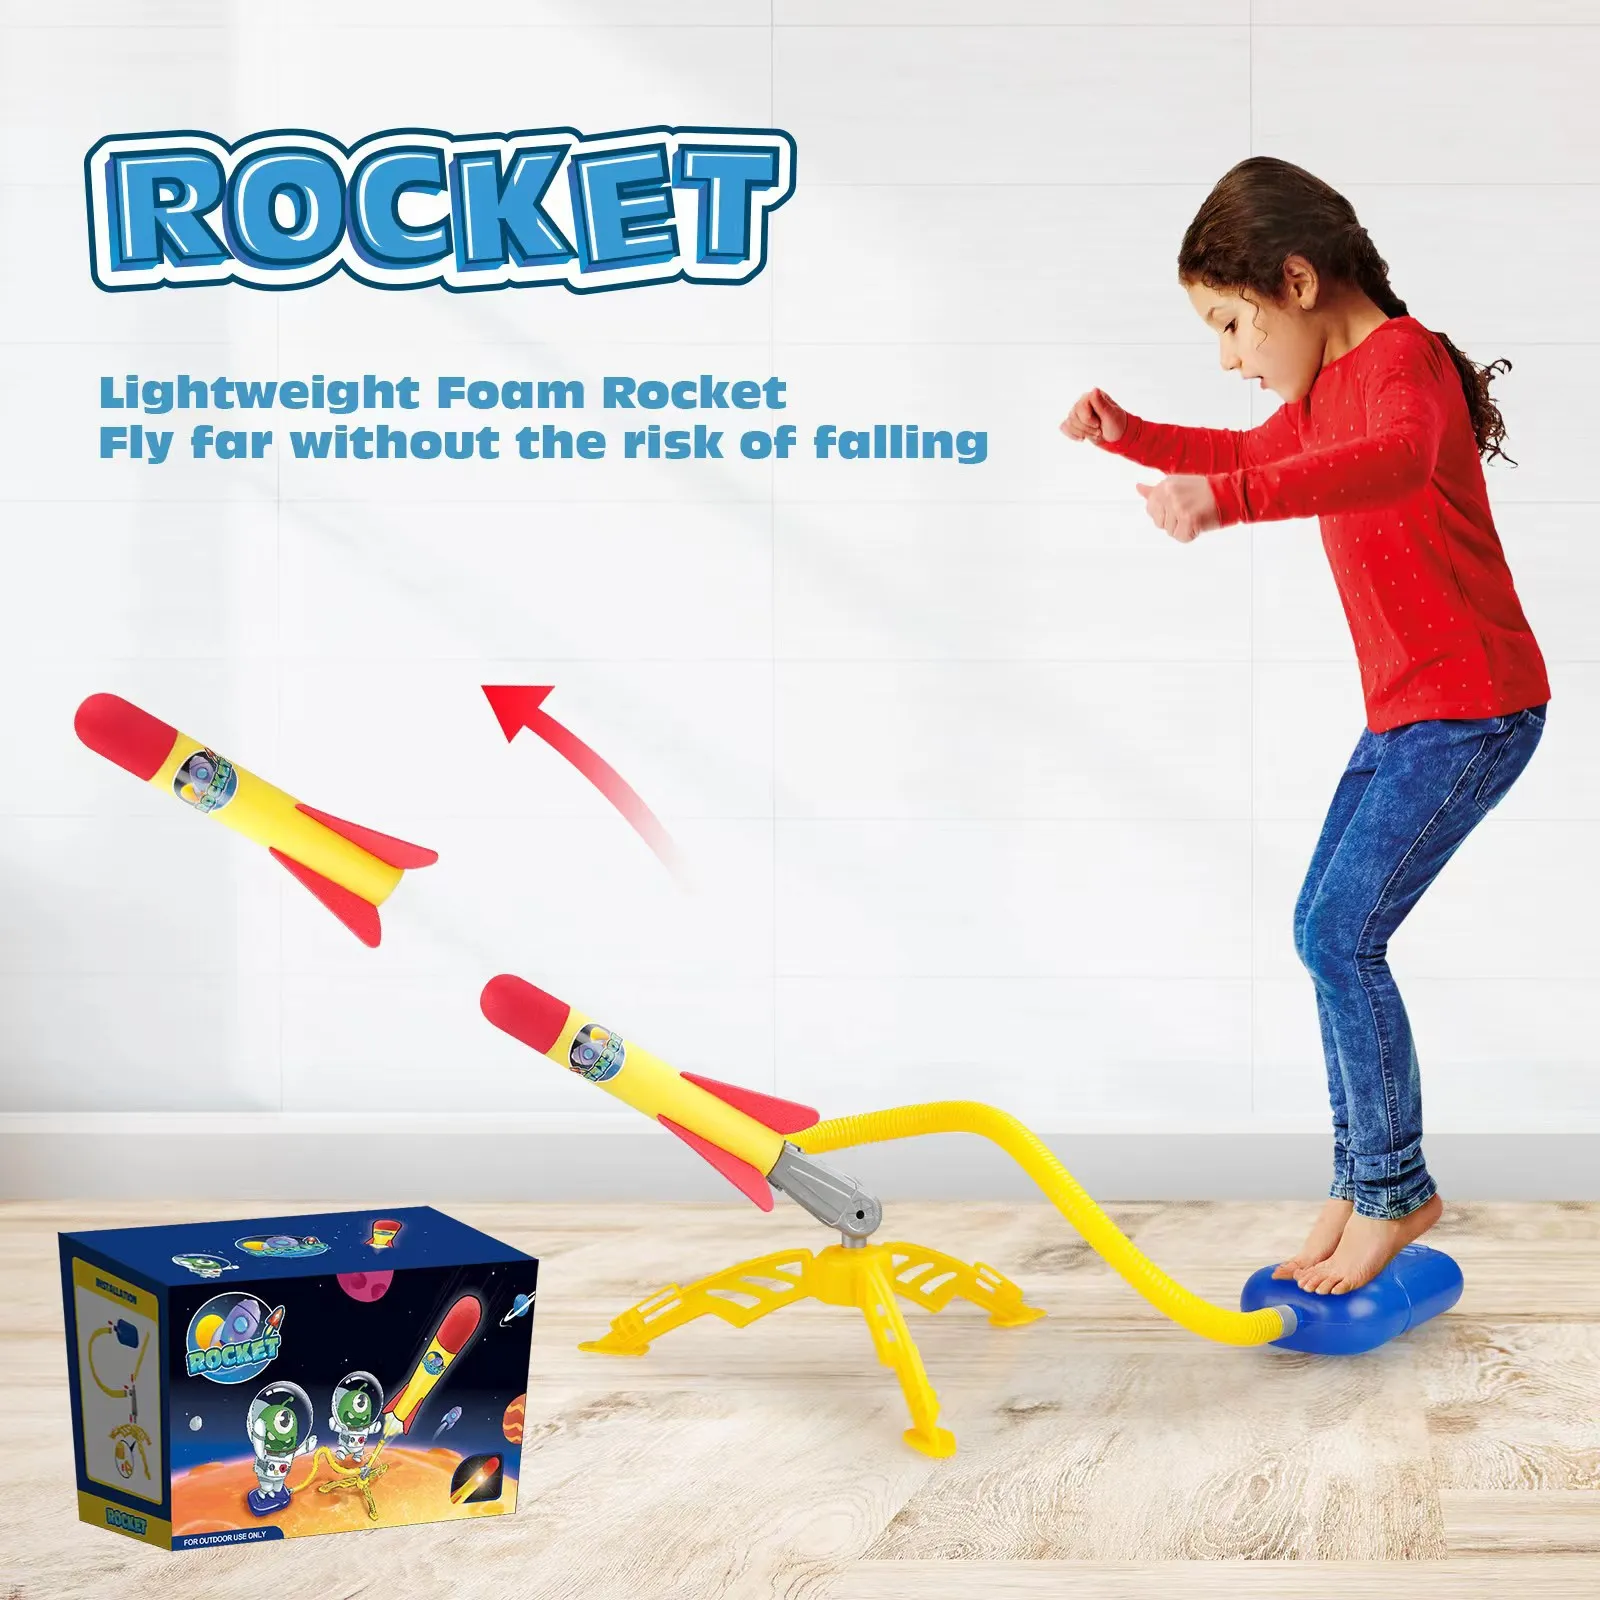 

Children Air Stomp Rocket Launcher Toy Flying Foam Rockets Foot Pump Jump Pressed Outdoor Interactive Game for Kids Boys